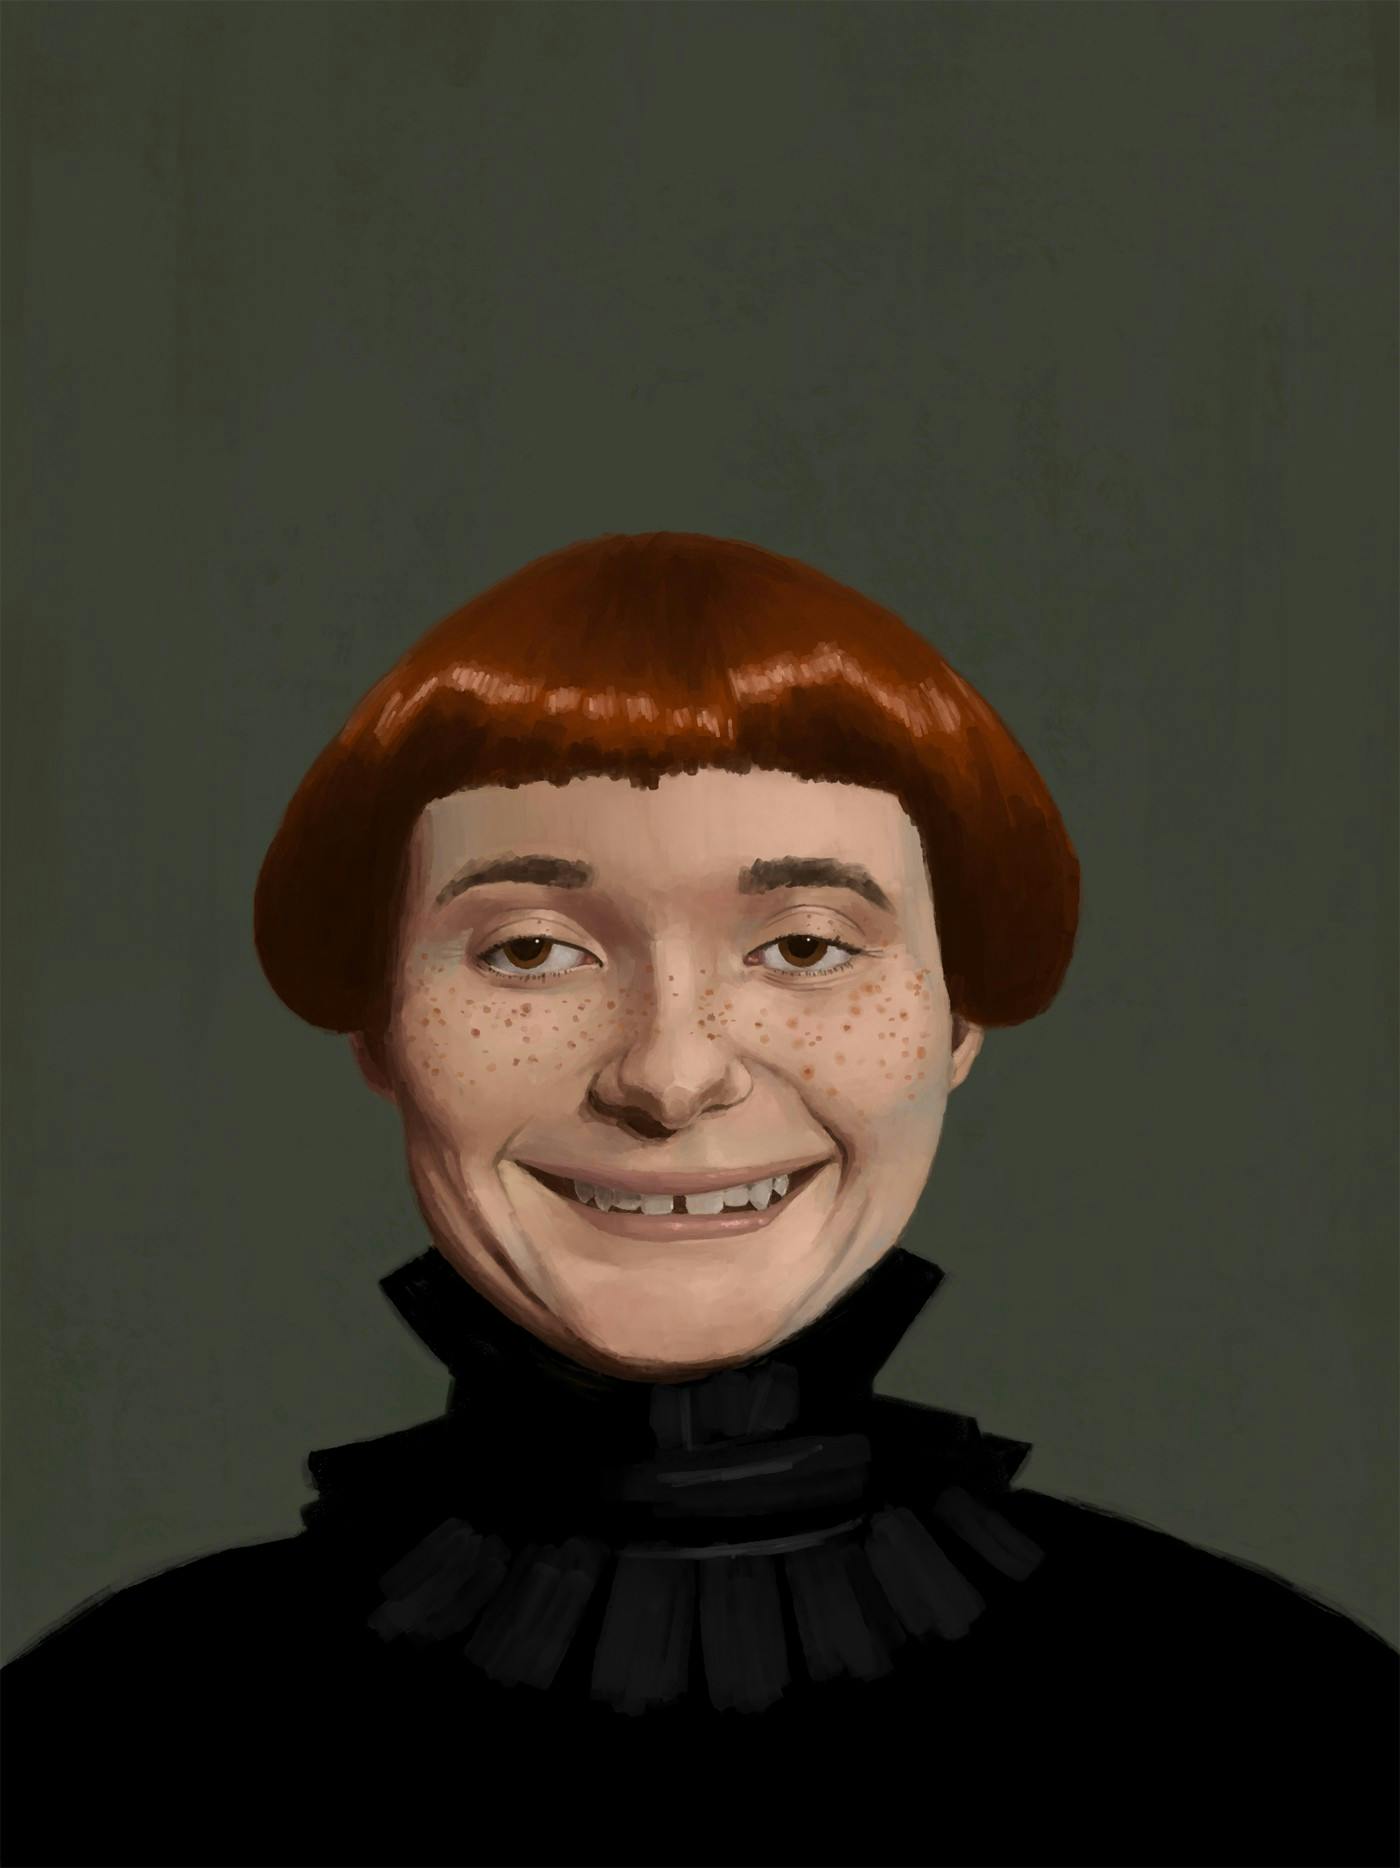 A realistic digital portrait in a painterly style depicting a young woman with short, bob-cut red hair, wearing a black dress with a Victorian style collar.